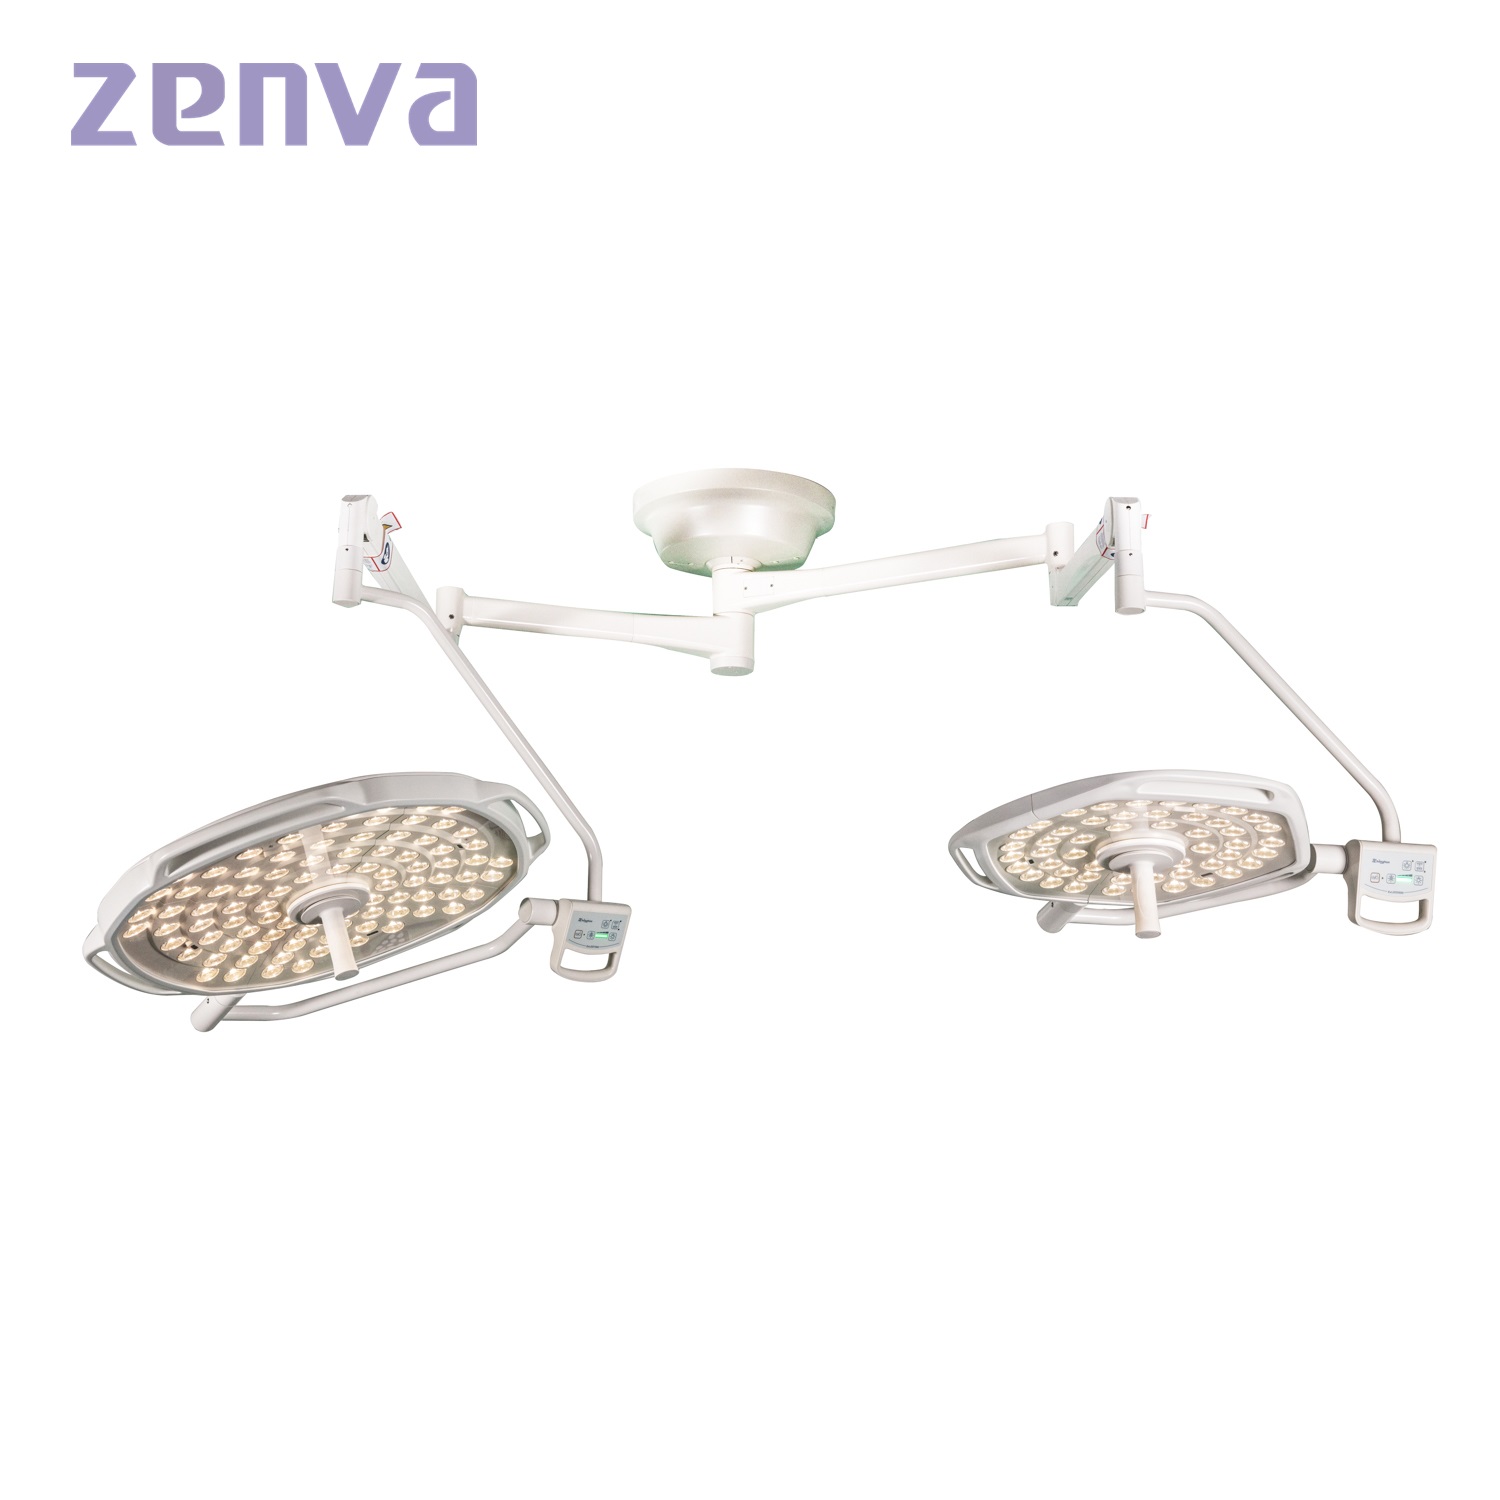 Modular Double Head Operating Theater light for Surgery Featured Image